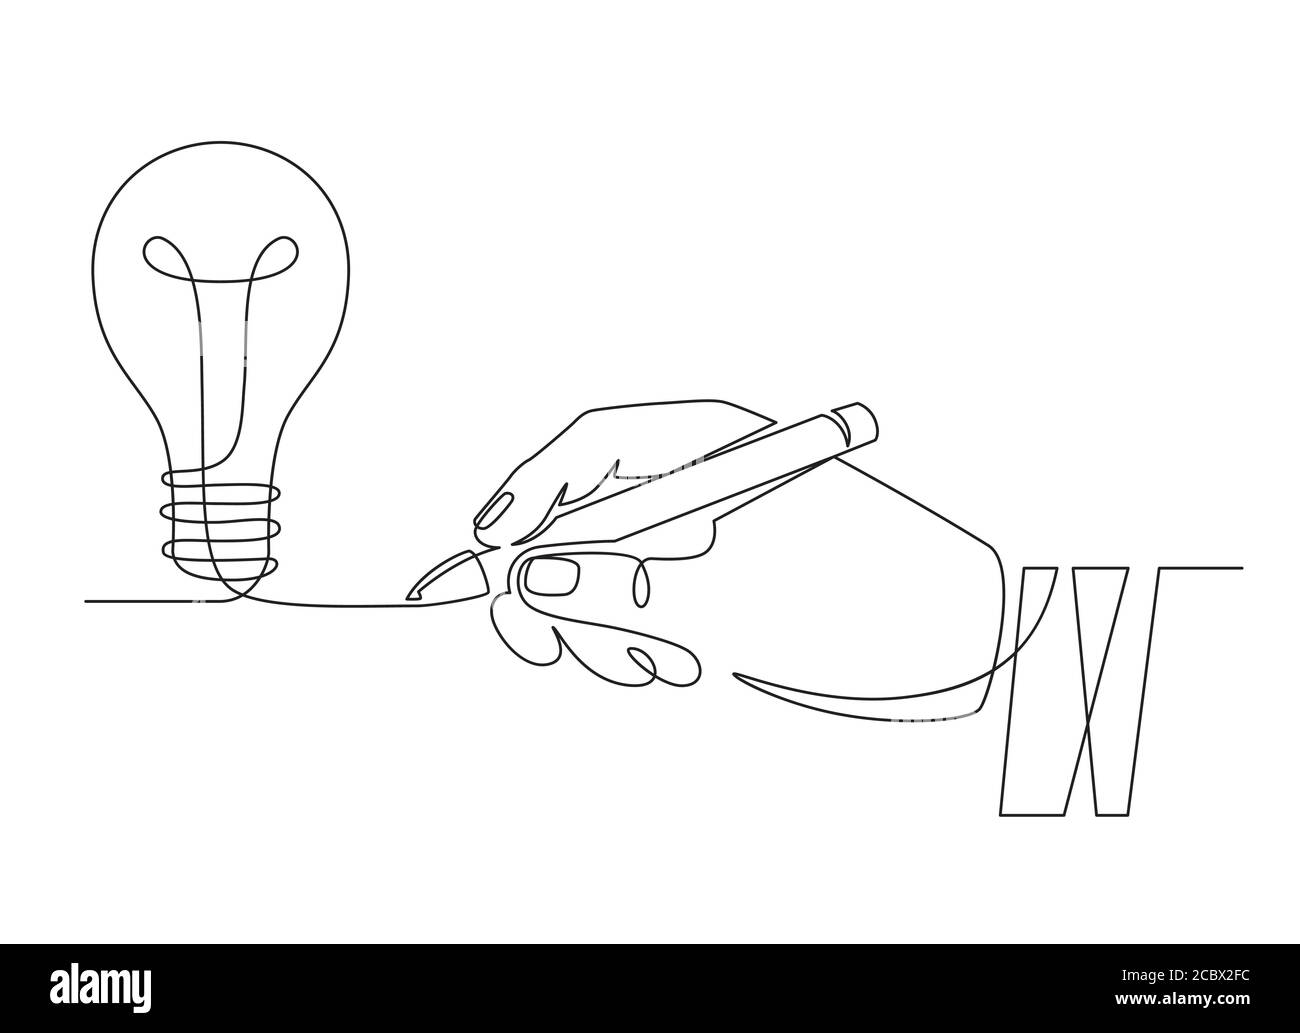 Light bulb idea. Sketch hand with pen drawing one line bulb, invention or creative thinking symbol. New project, brainstorm vector concept Stock Vector